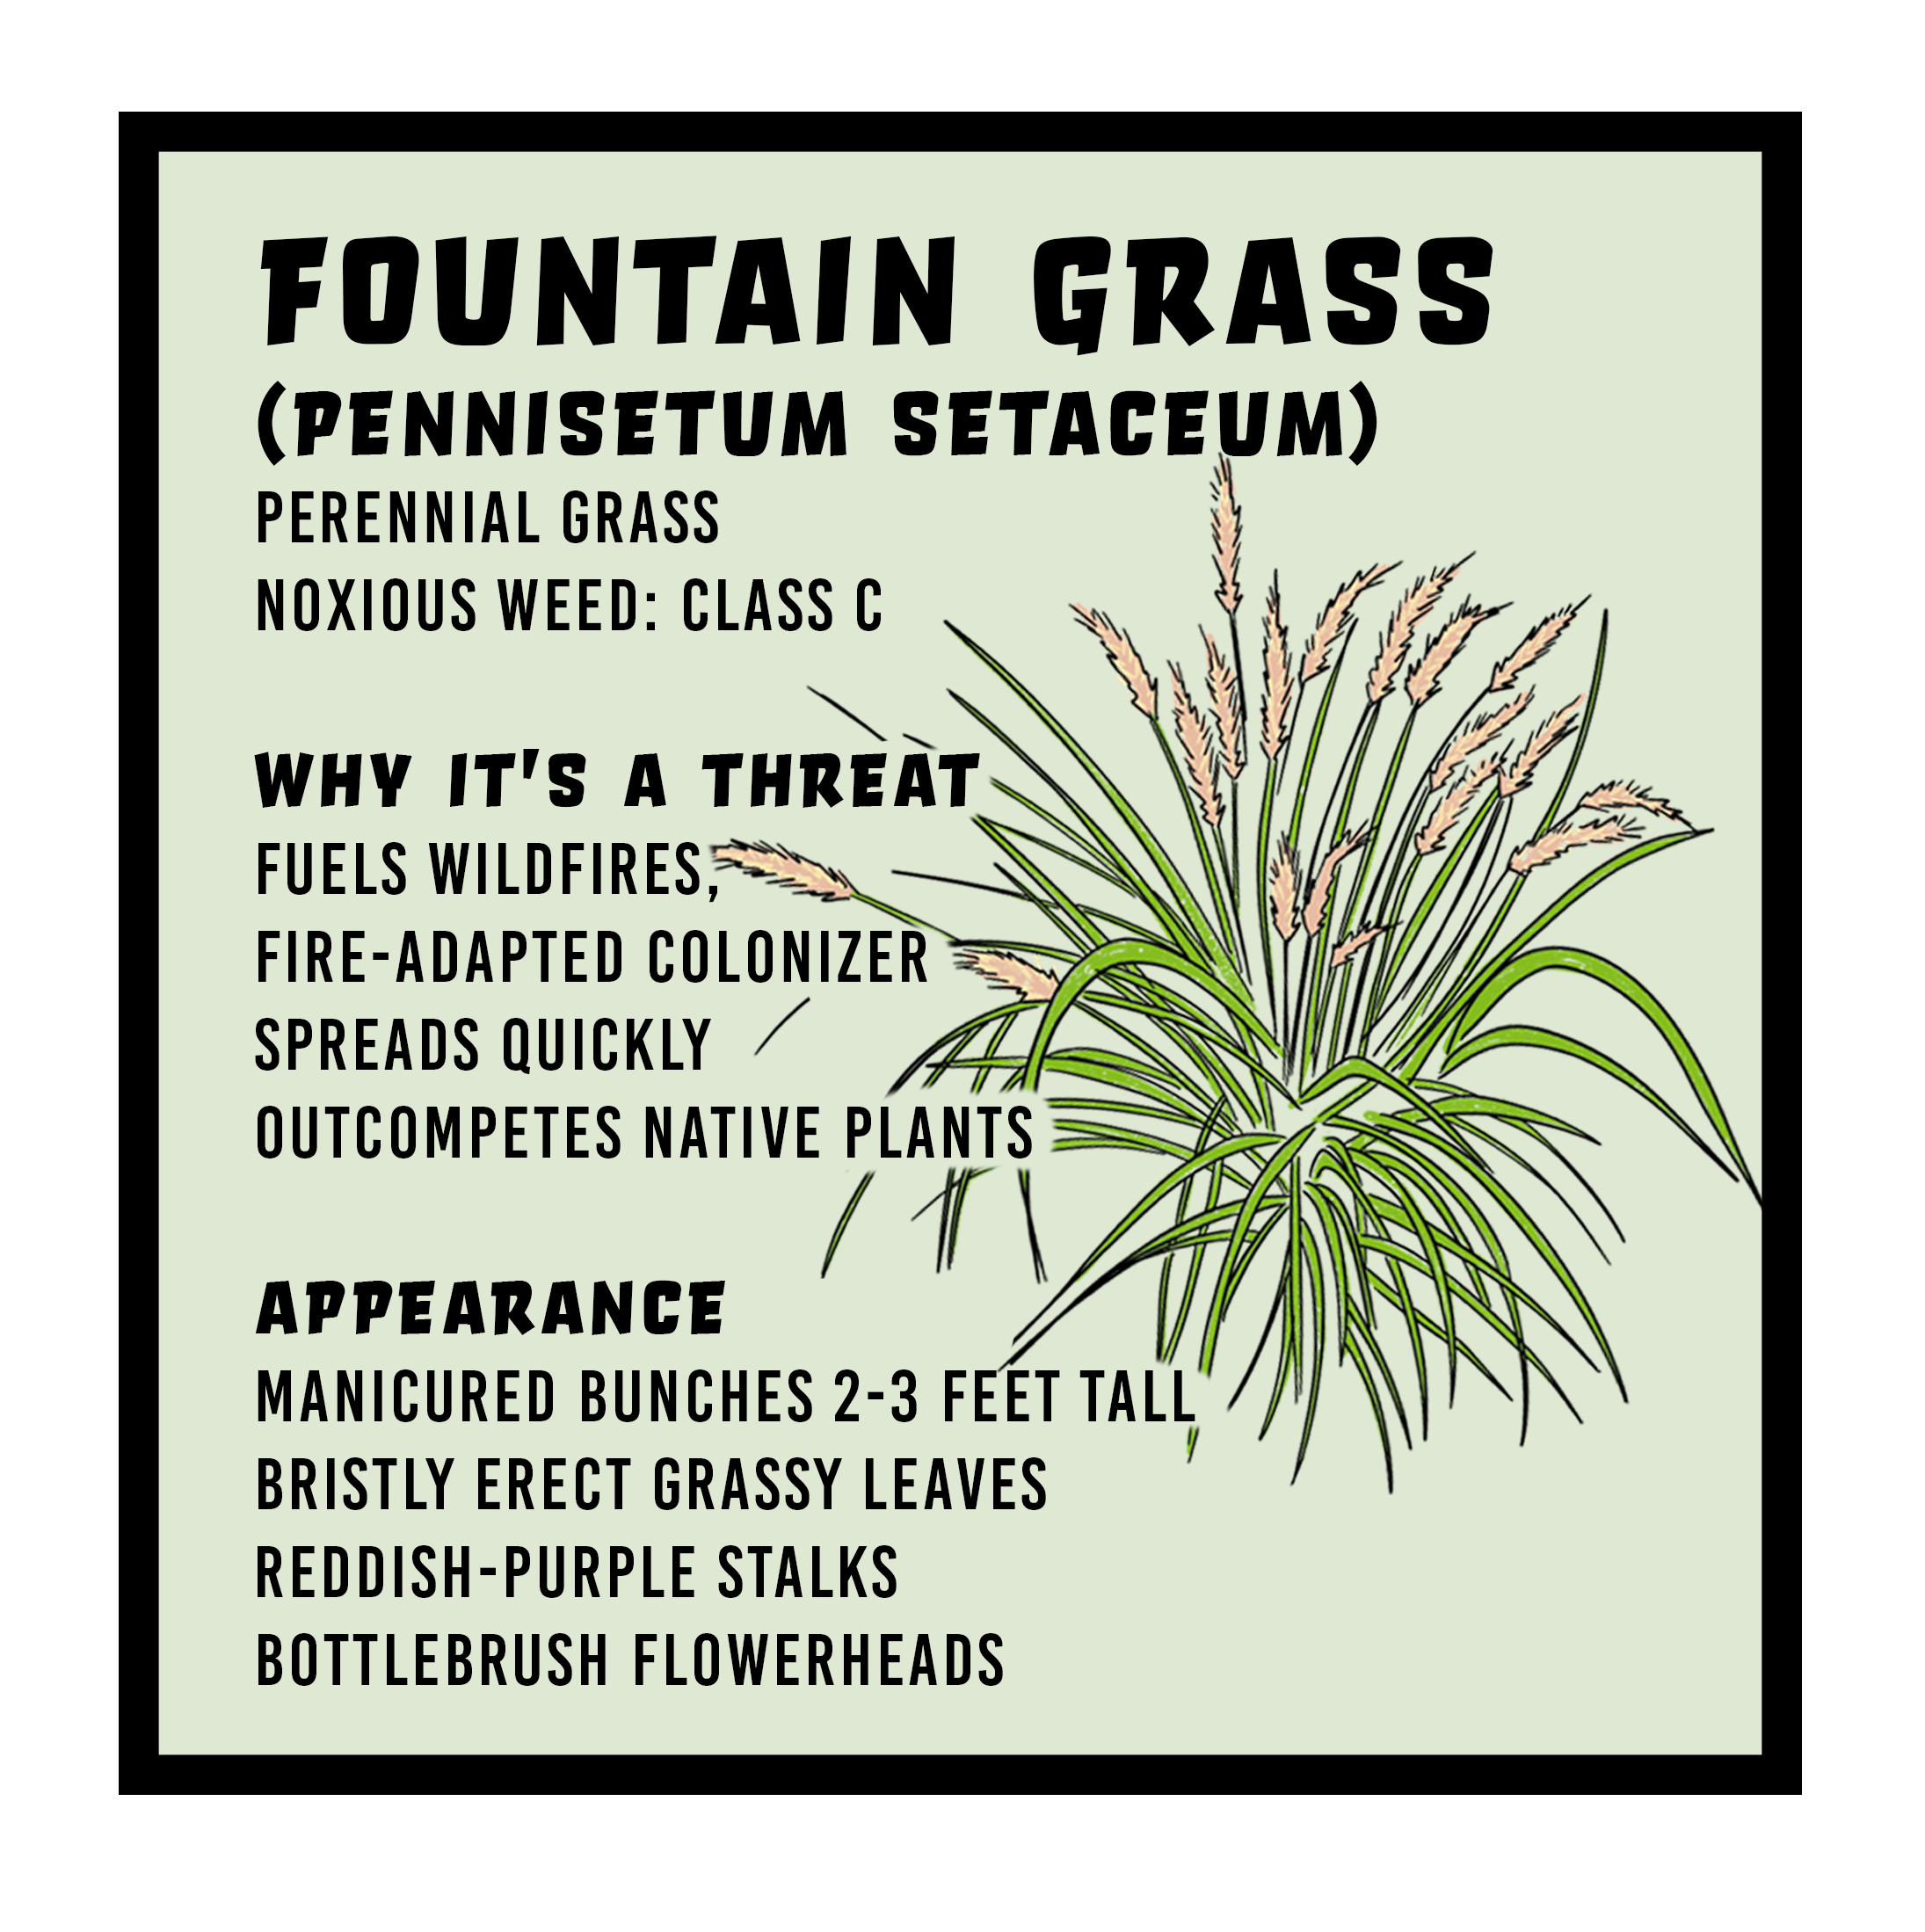 Fountain Grass infographic 